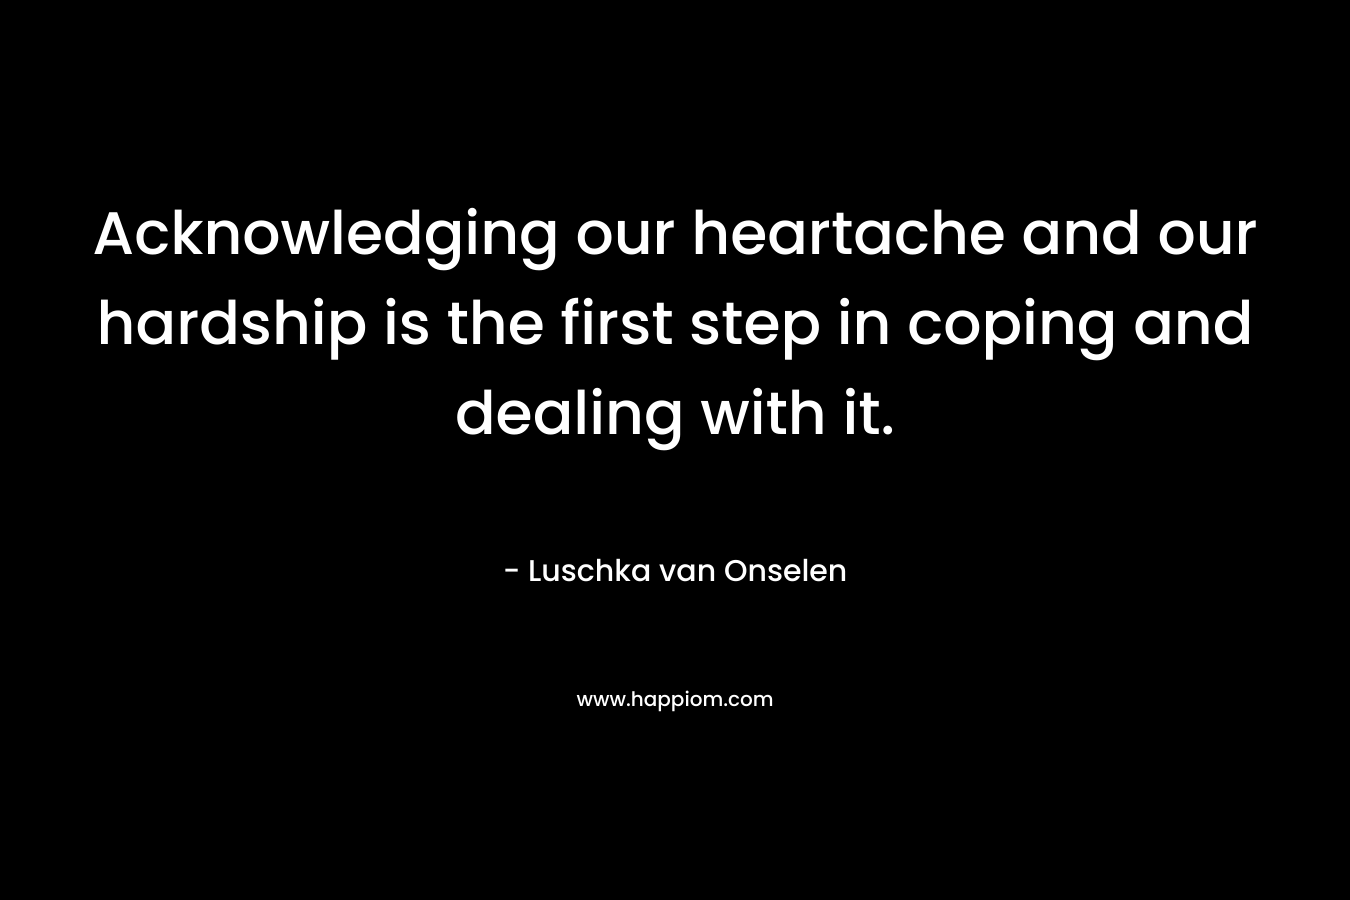 Acknowledging our heartache and our hardship is the first step in coping and dealing with it.